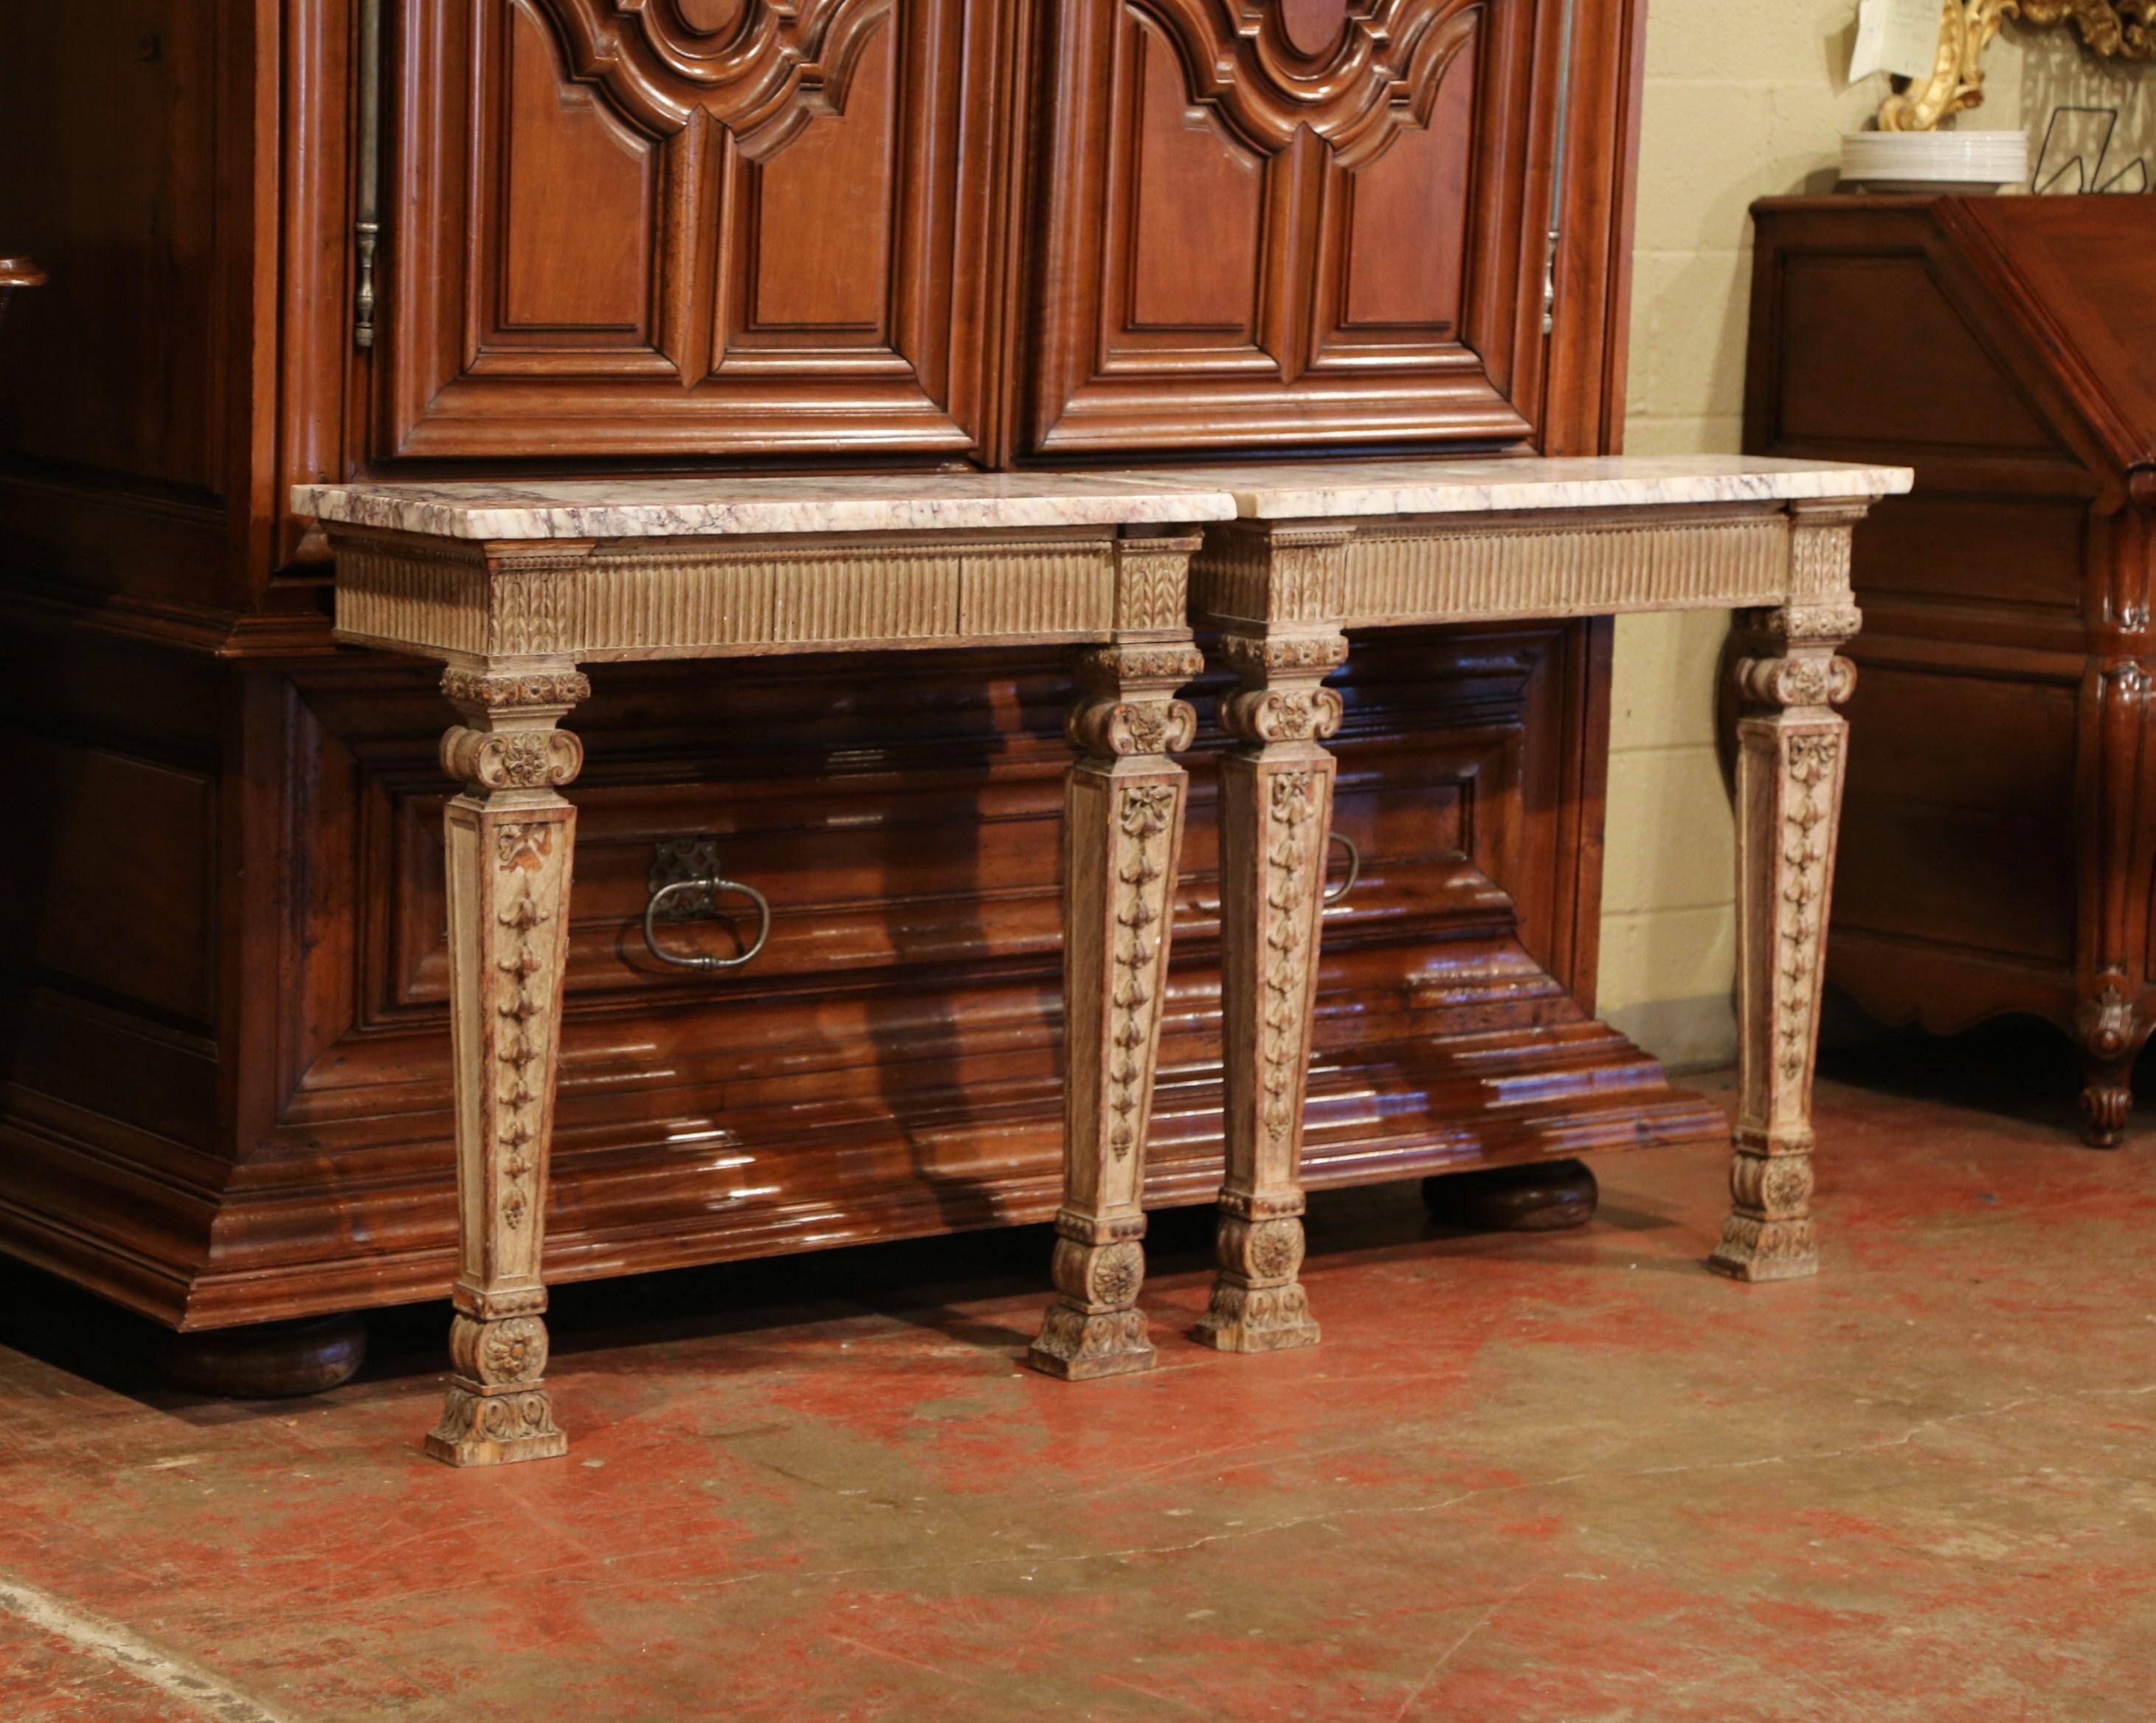 Decorate a hallway or bedroom with this elegant pair of antique, carved wall consoles. Crafted in France, circa 1760, each embellished table features heavy hand carved tapered legs and a central apron. The tables are topped with a white marble slab